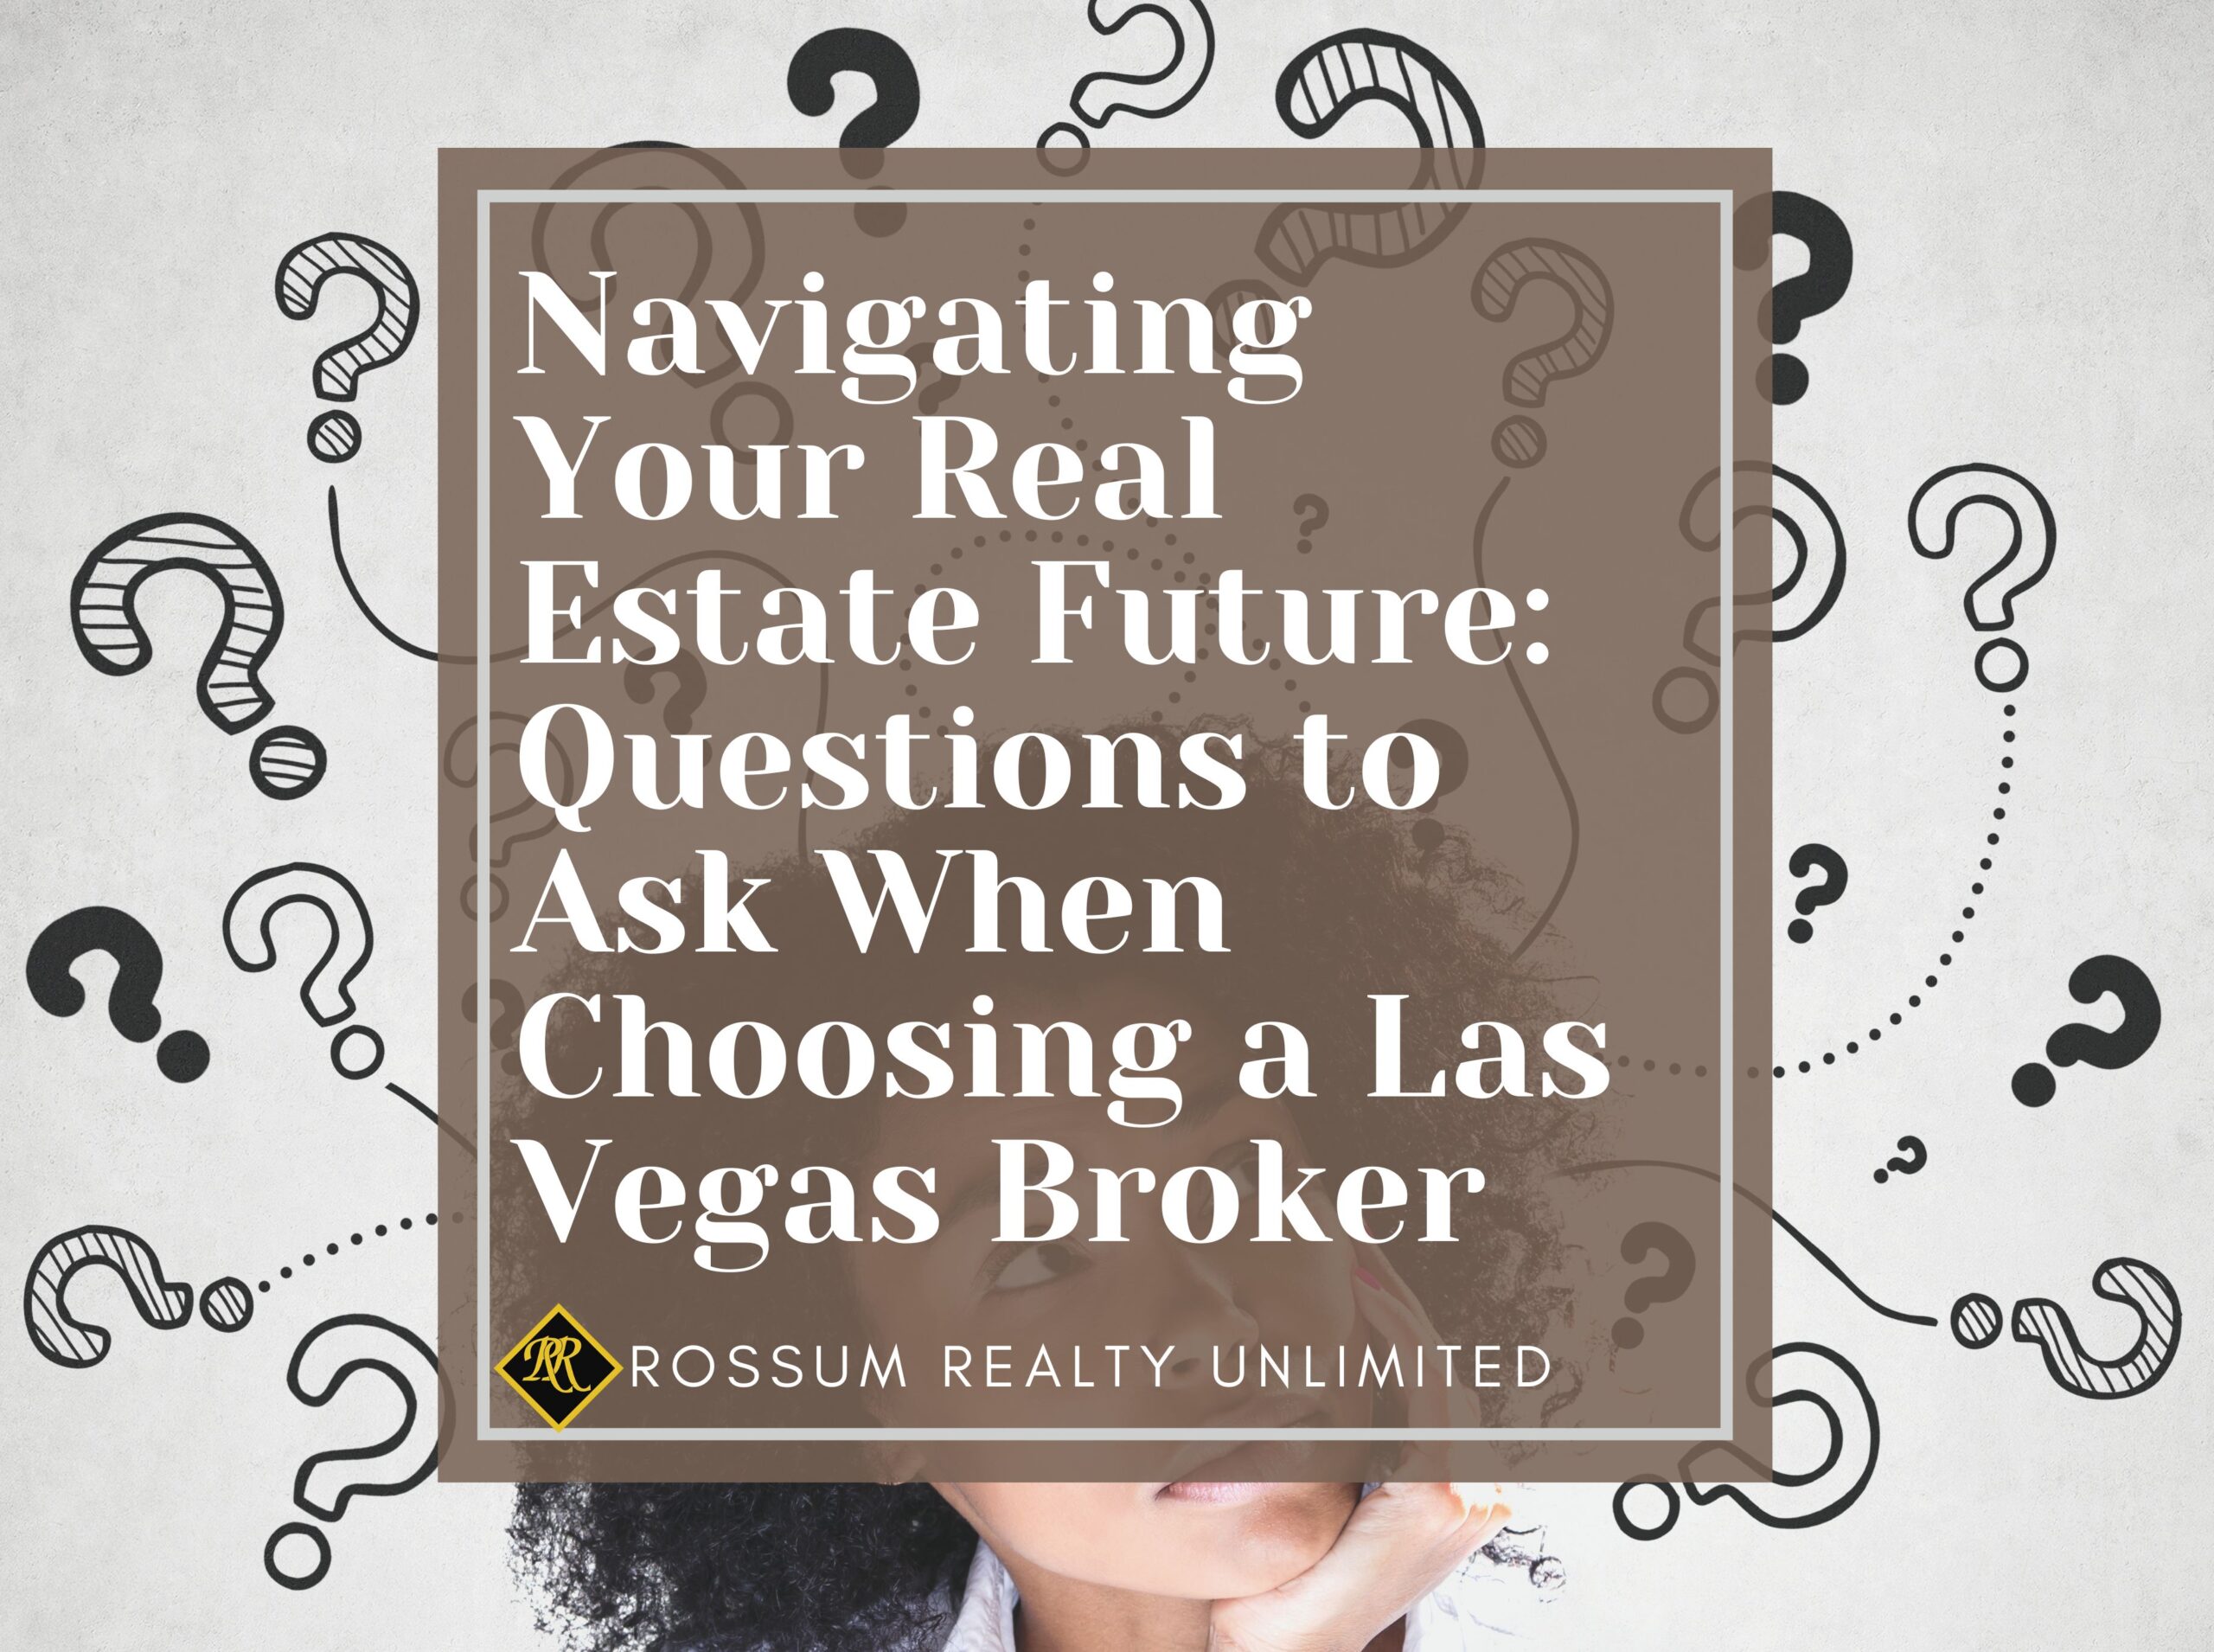 Navigating Your Real Estate Future: Questions to Ask When Choosing a Las Vegas Broker